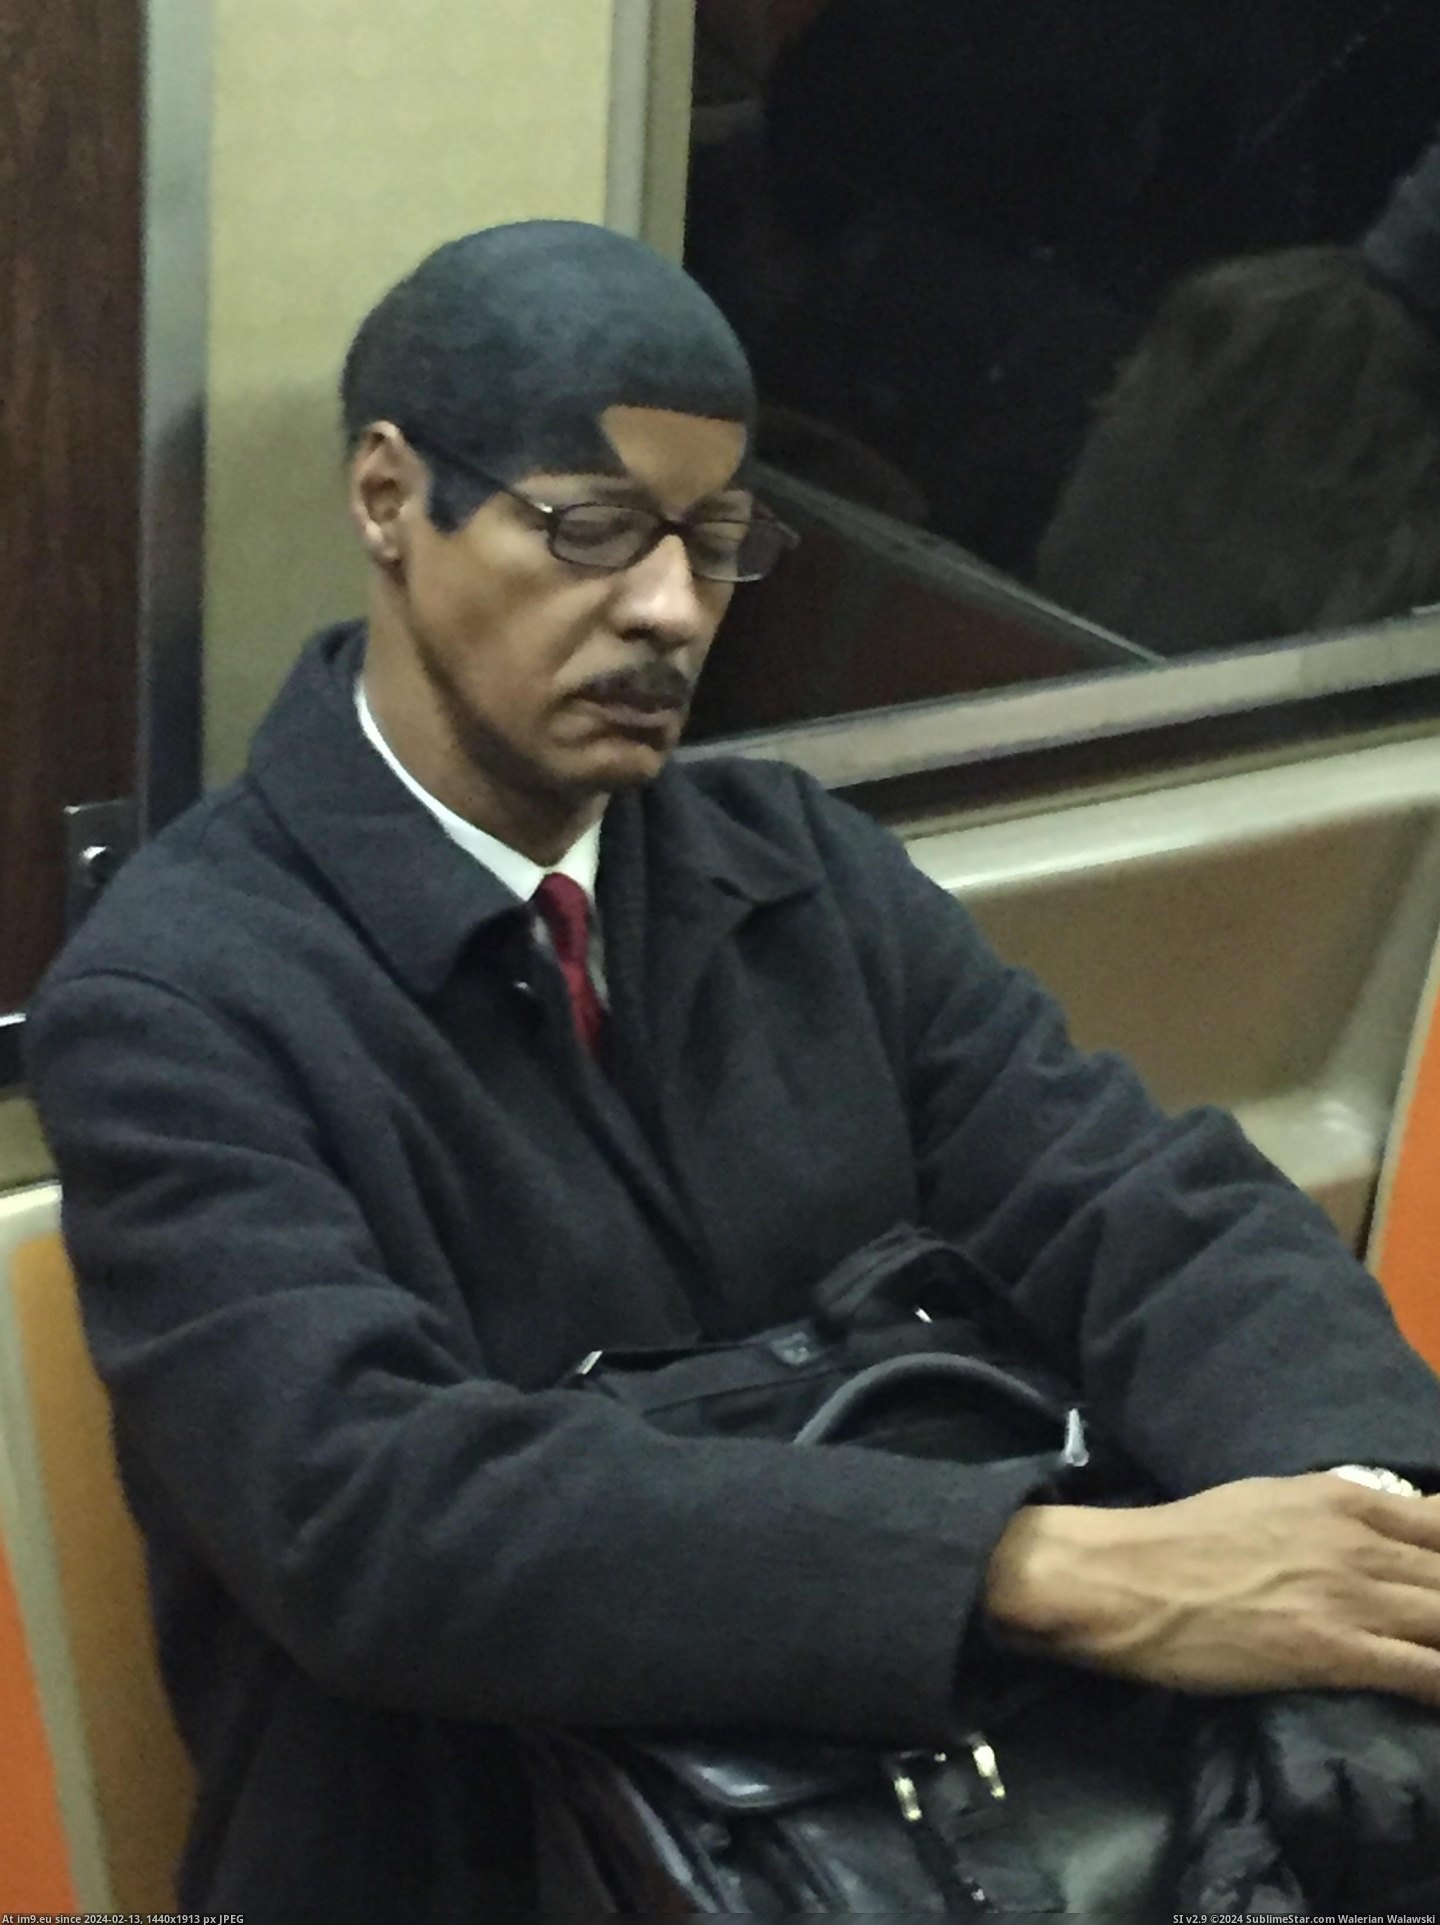 #Wtf #Guy #Sharpie #Nyc #Subway [Wtf] Guy with a Sharpie'd hairline on a NYC subway Pic. (Image of album My r/WTF favs))